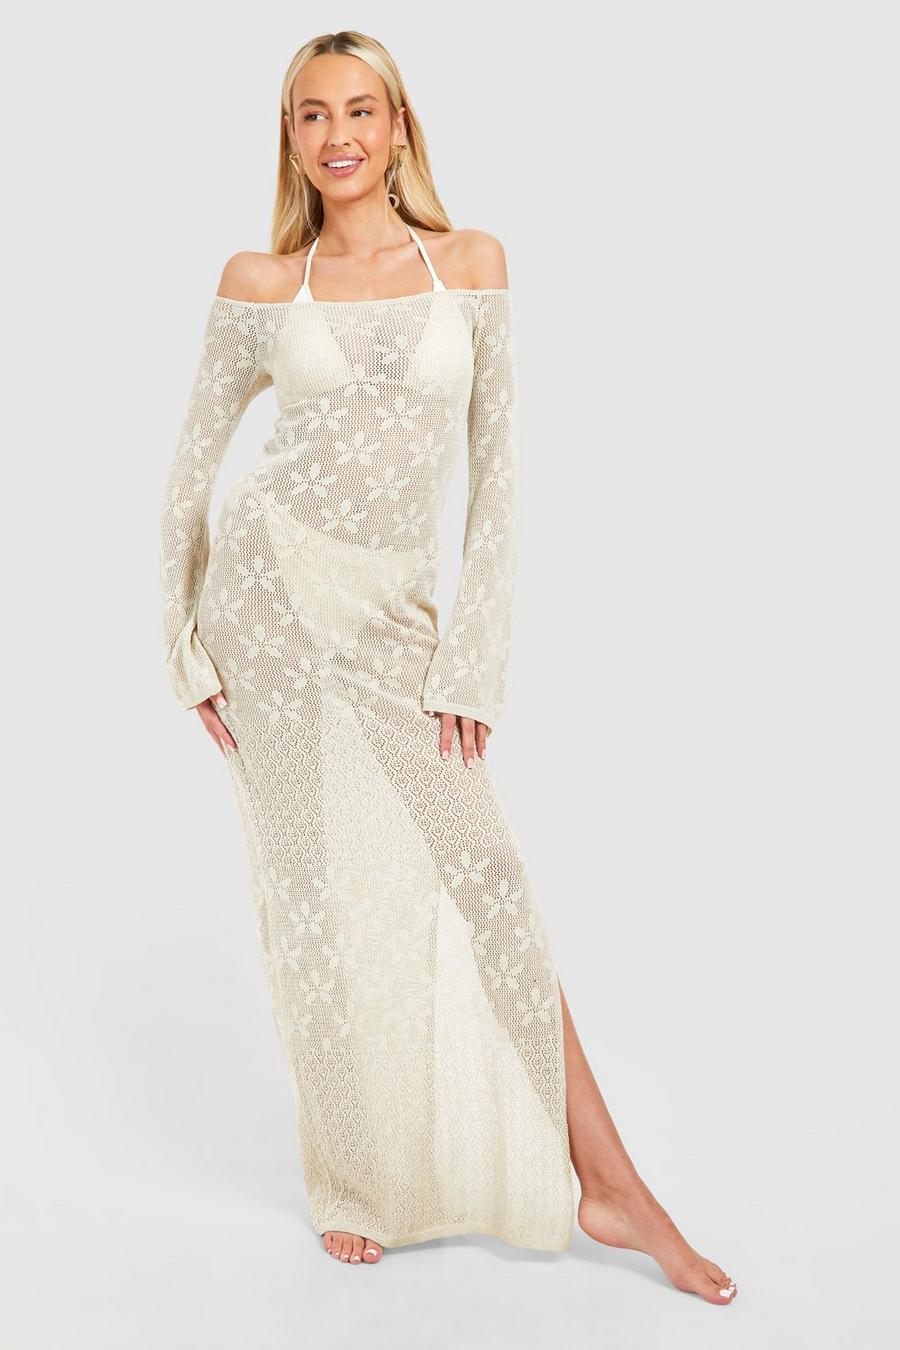 Stone Tall Off The Shoulder Floral Crochet Maxi Dress